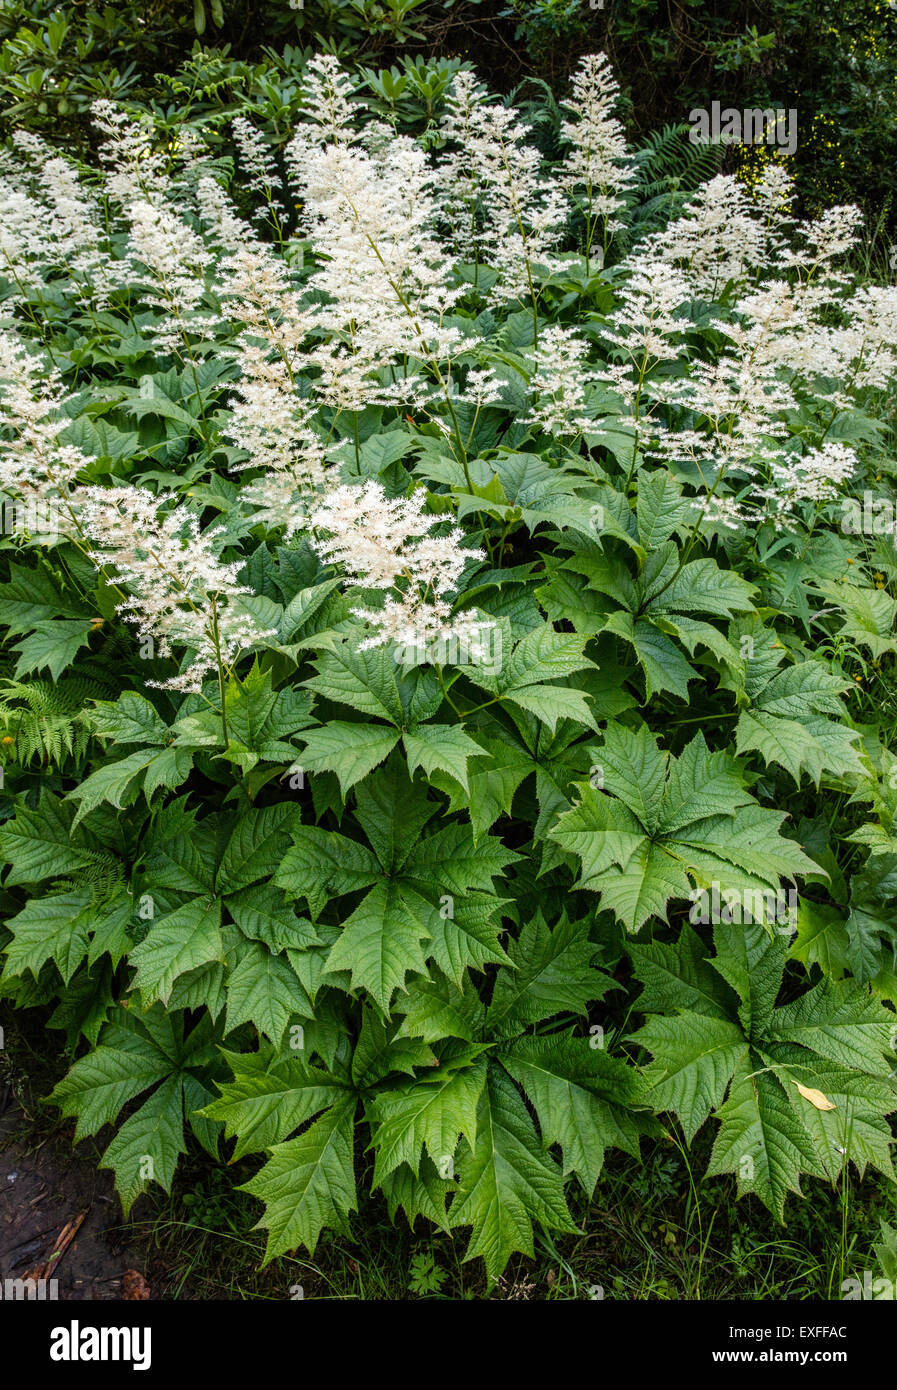 White form of Rodgersia aesculifolia or podophylla - a vigorous shade loving perennial garden flower with deeply divided leaves Stock Photo